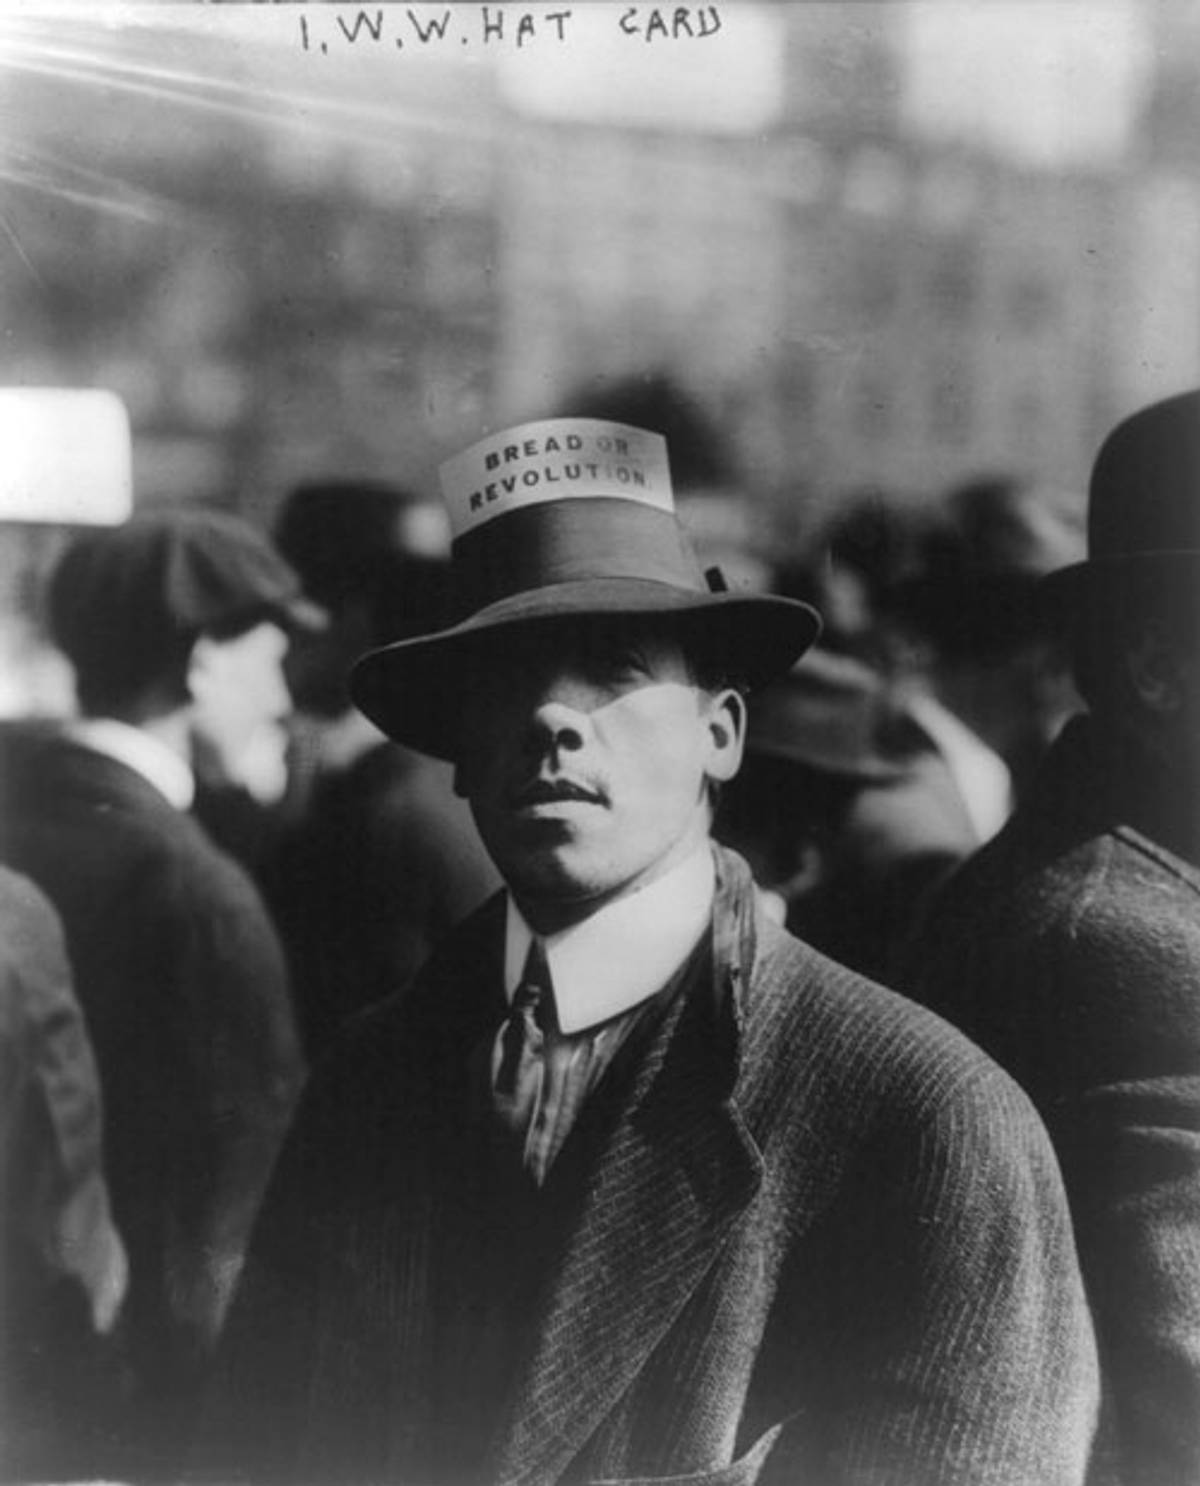 Ian Turner, of the IWW committee, wearing a hat with a card labeled ‘Bread or Revolution’ stuck in the brim (Photo: Library of Congress)